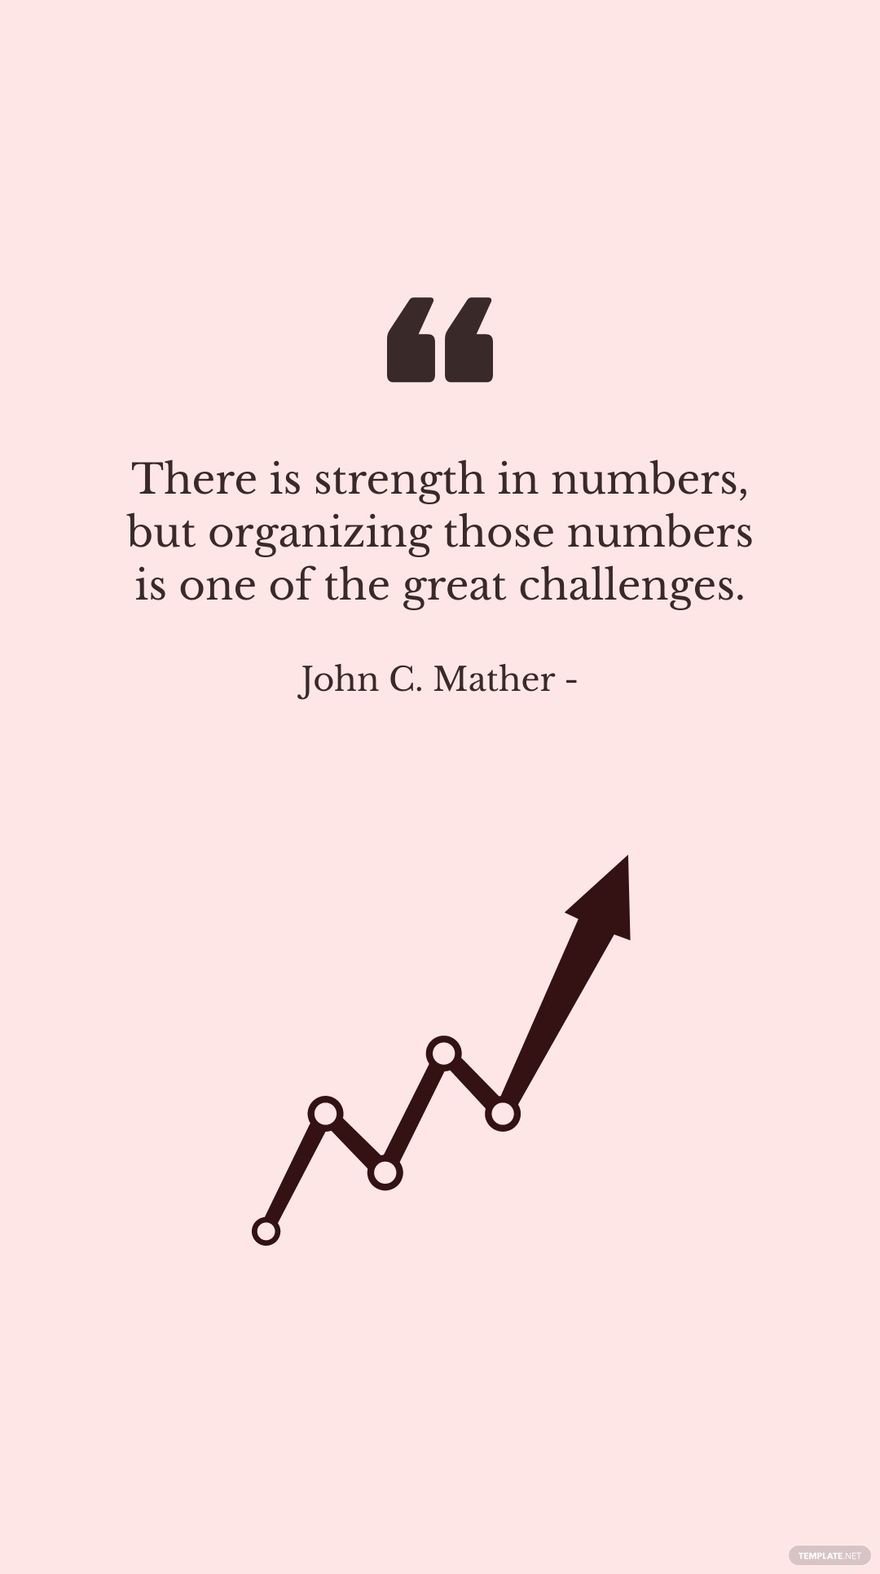 John C. Mather - There is strength in numbers, but organizing those numbers is one of the great challenges.